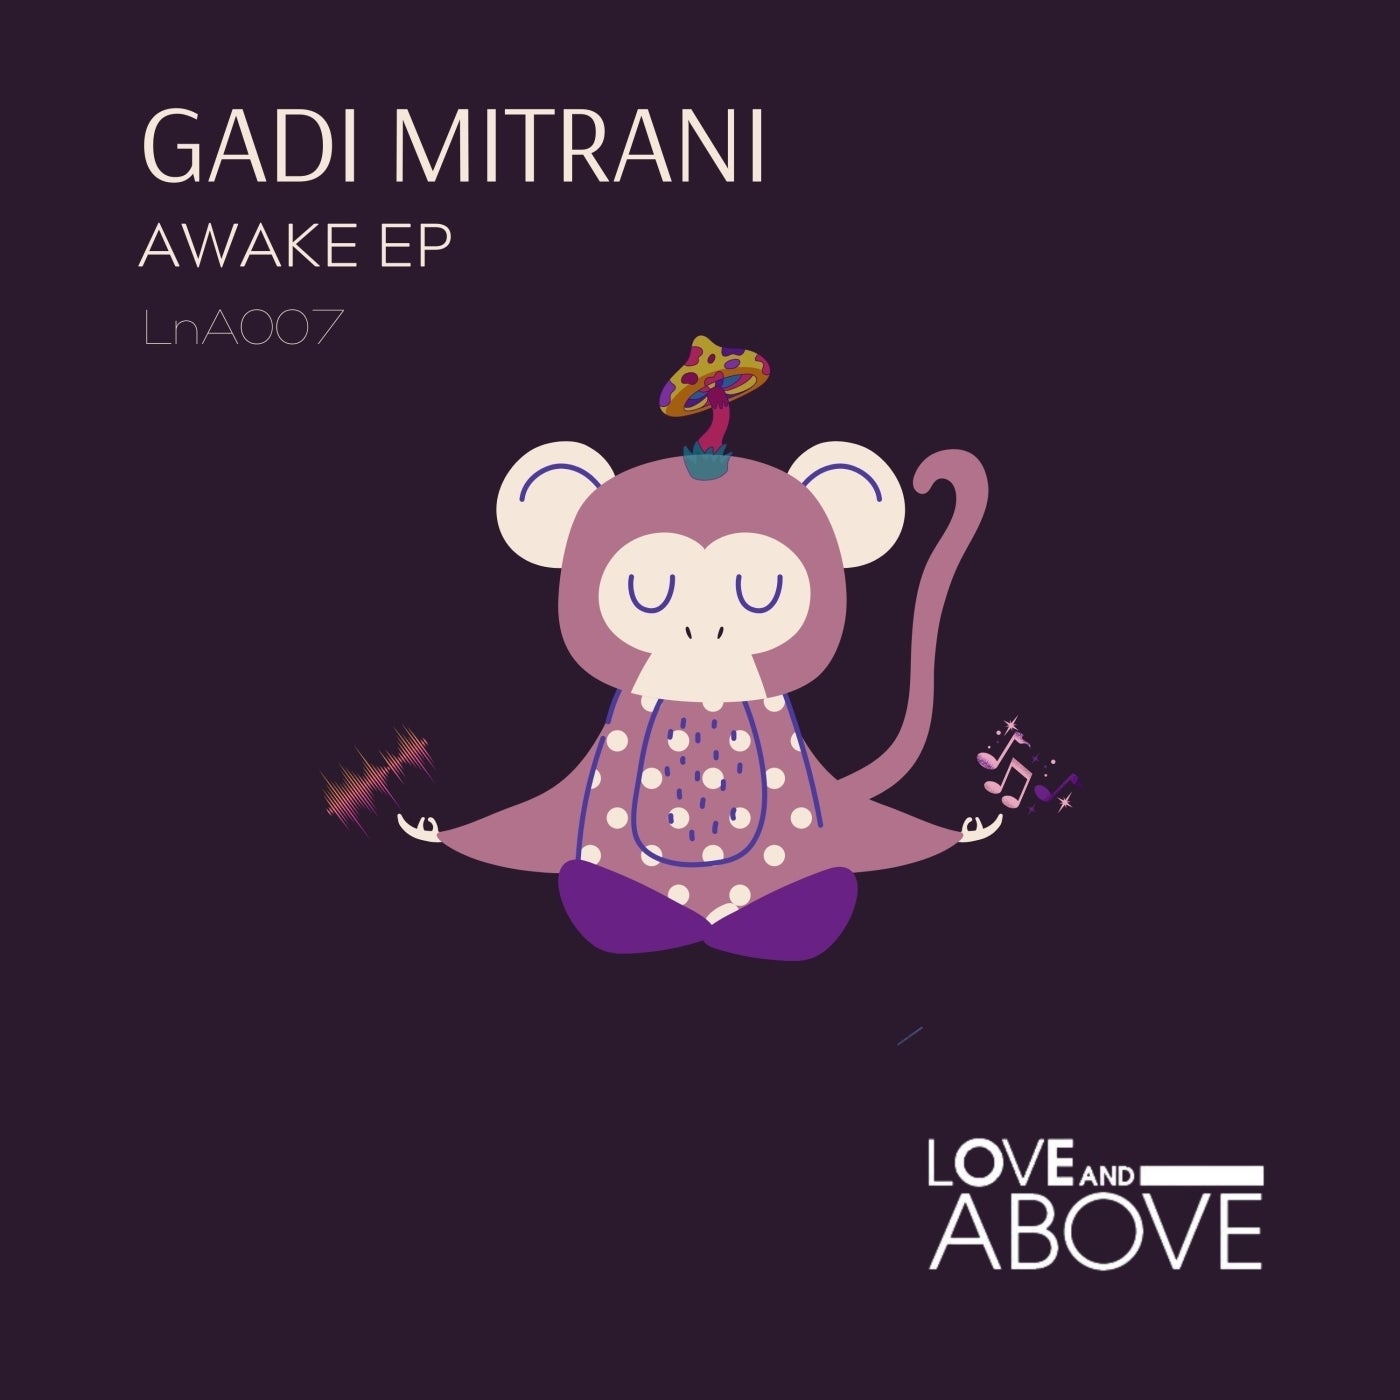 Love and Above artists & music download - Beatport